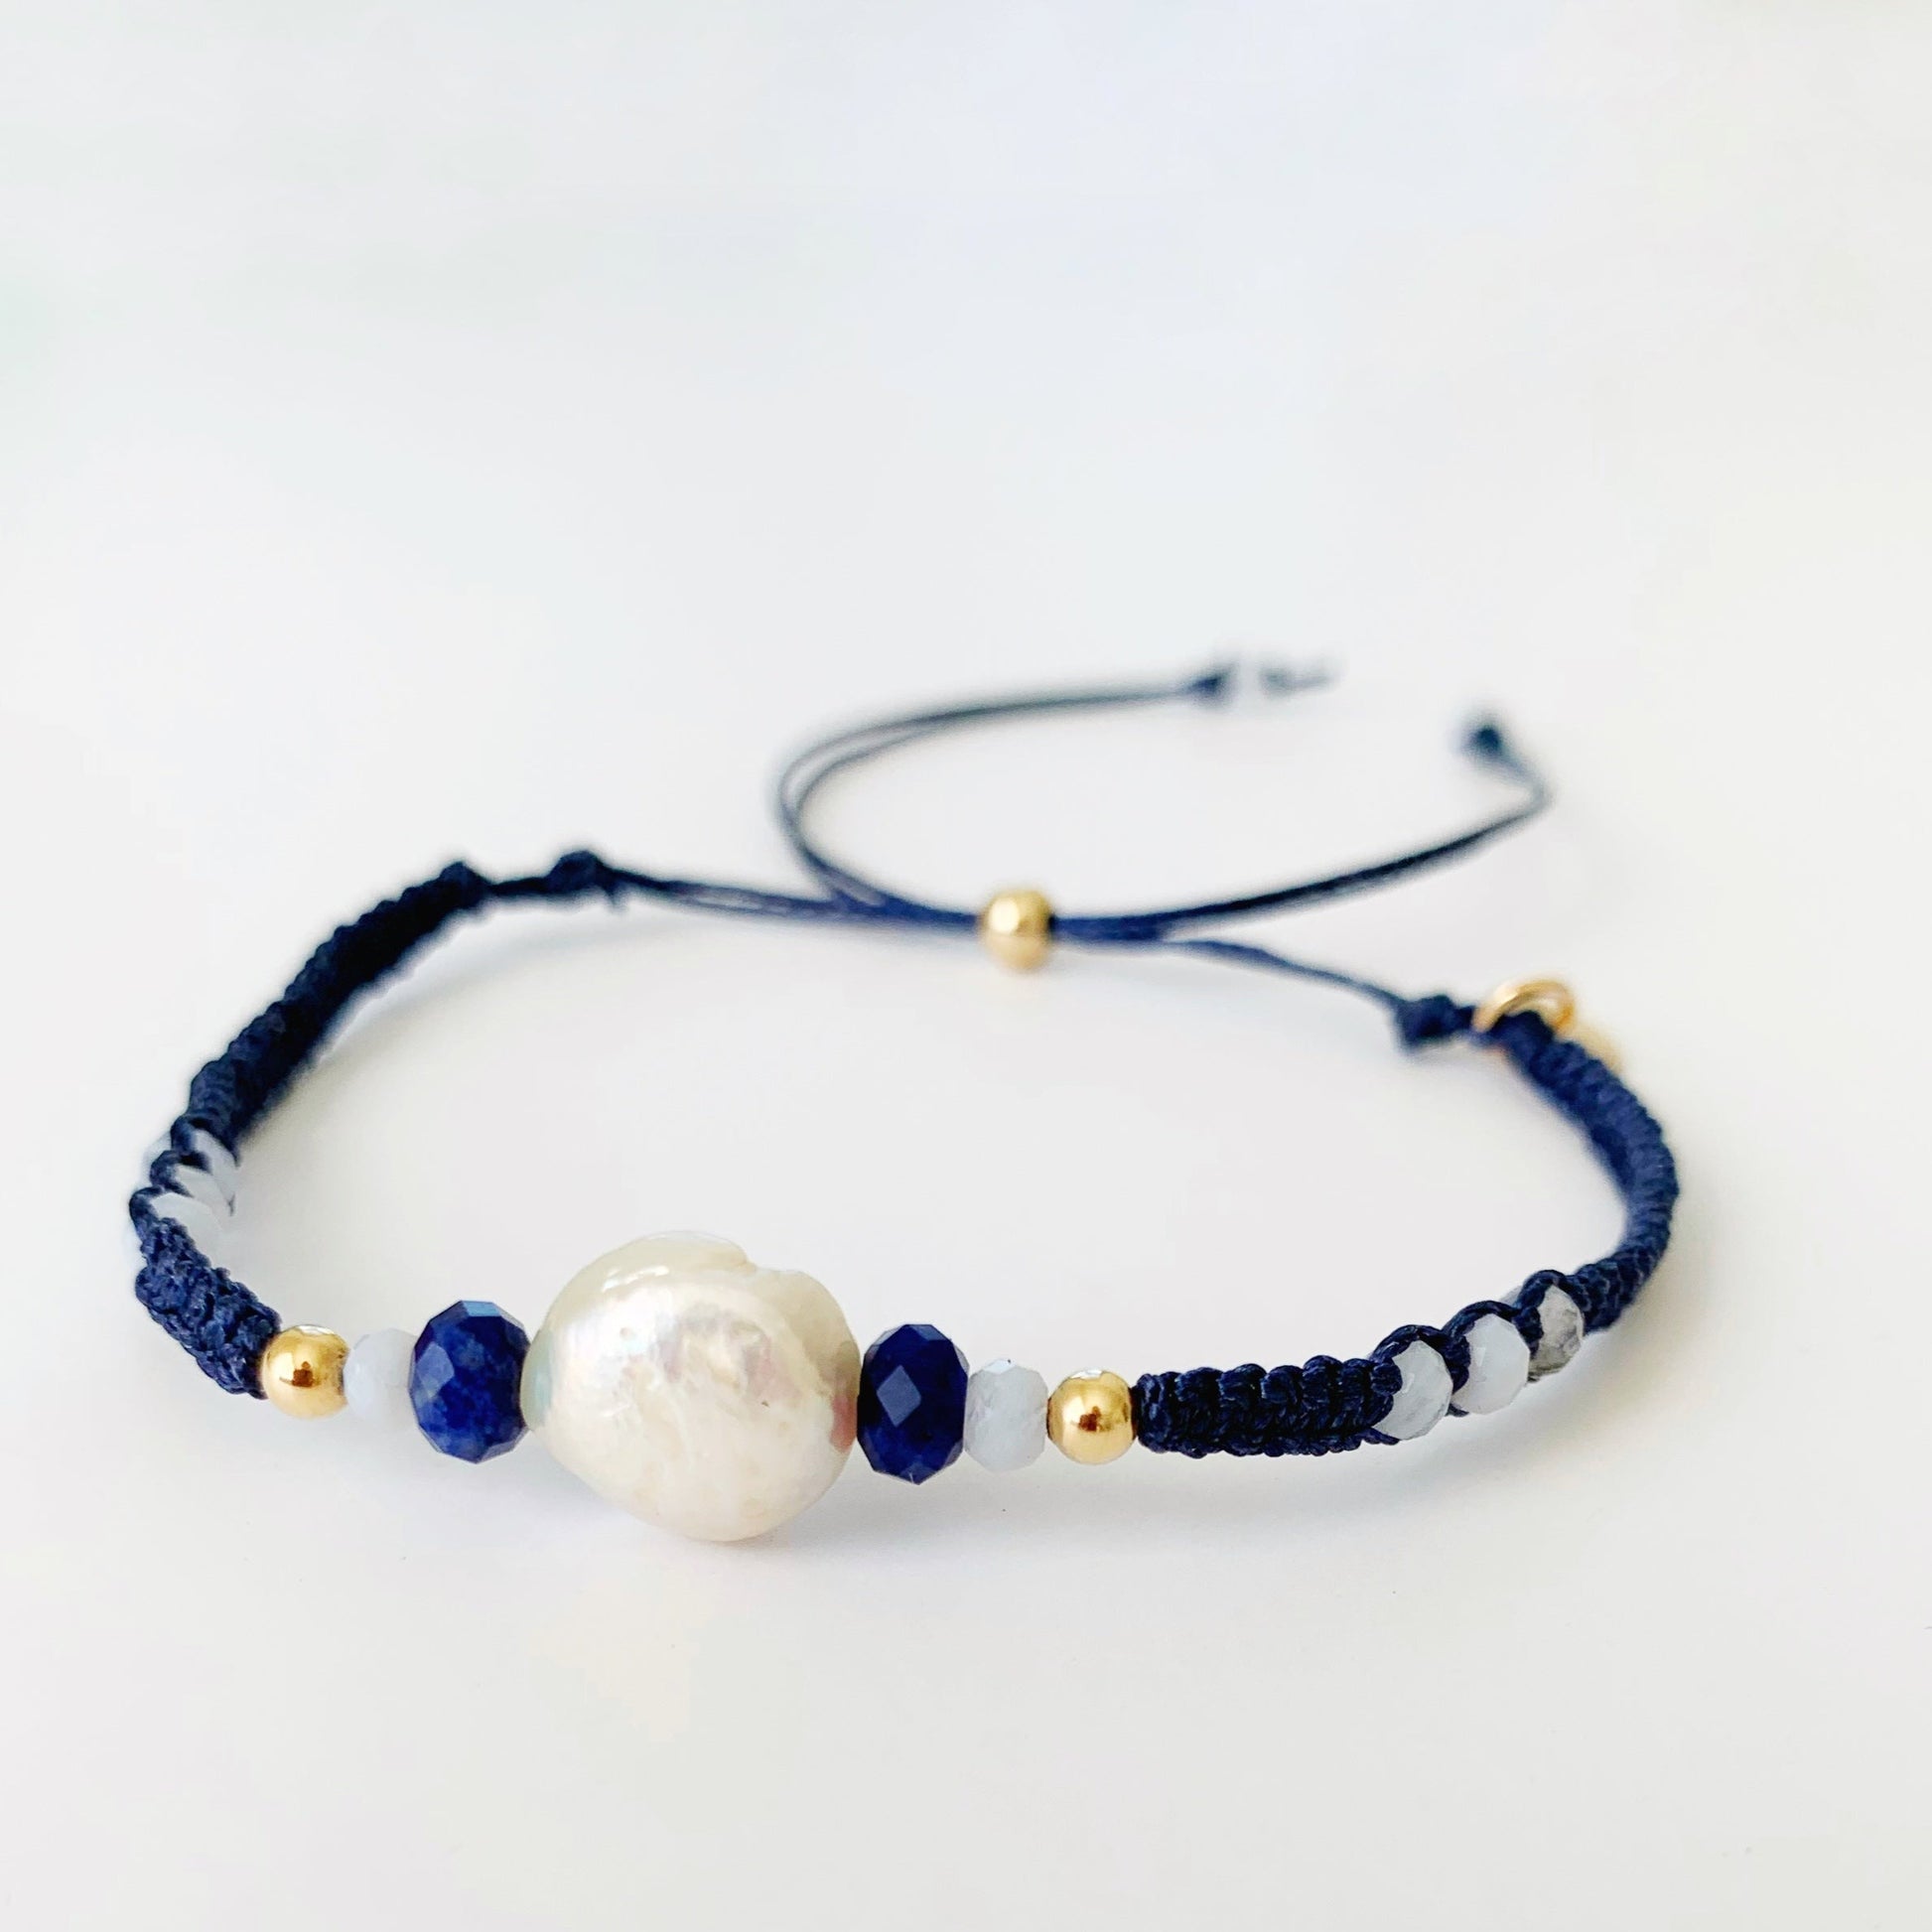 The bristol bracelet in knotical navy is a macrame bracelet in navy blue cord with a freshwater coin pearl and semiprecious beads at the center with a 14k gold filled slide bead clasp. this bracelet is photographed on a white surface